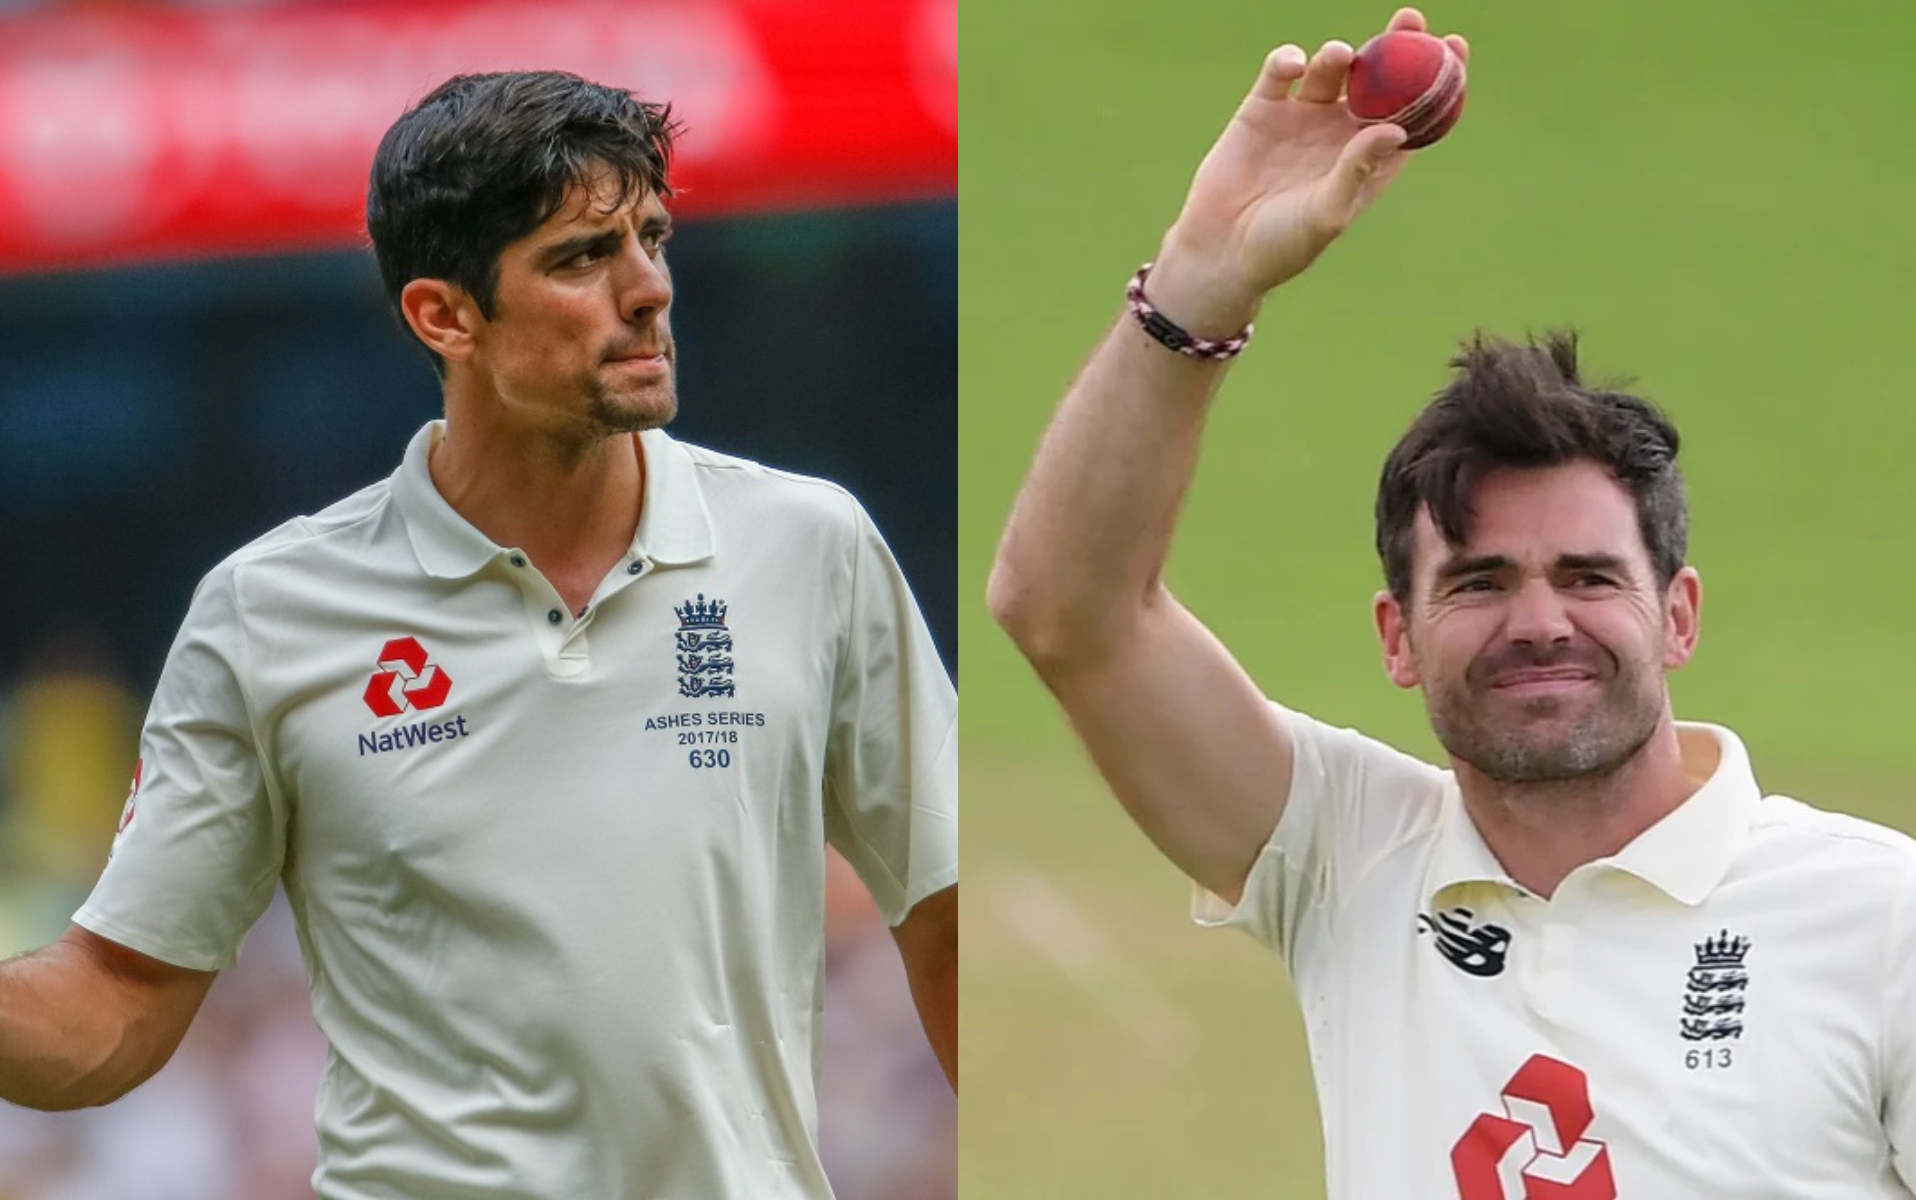 Alastair Cook (12472) and James Anderson (616 wickets) are the top performers in Tests of 21 century | Getty